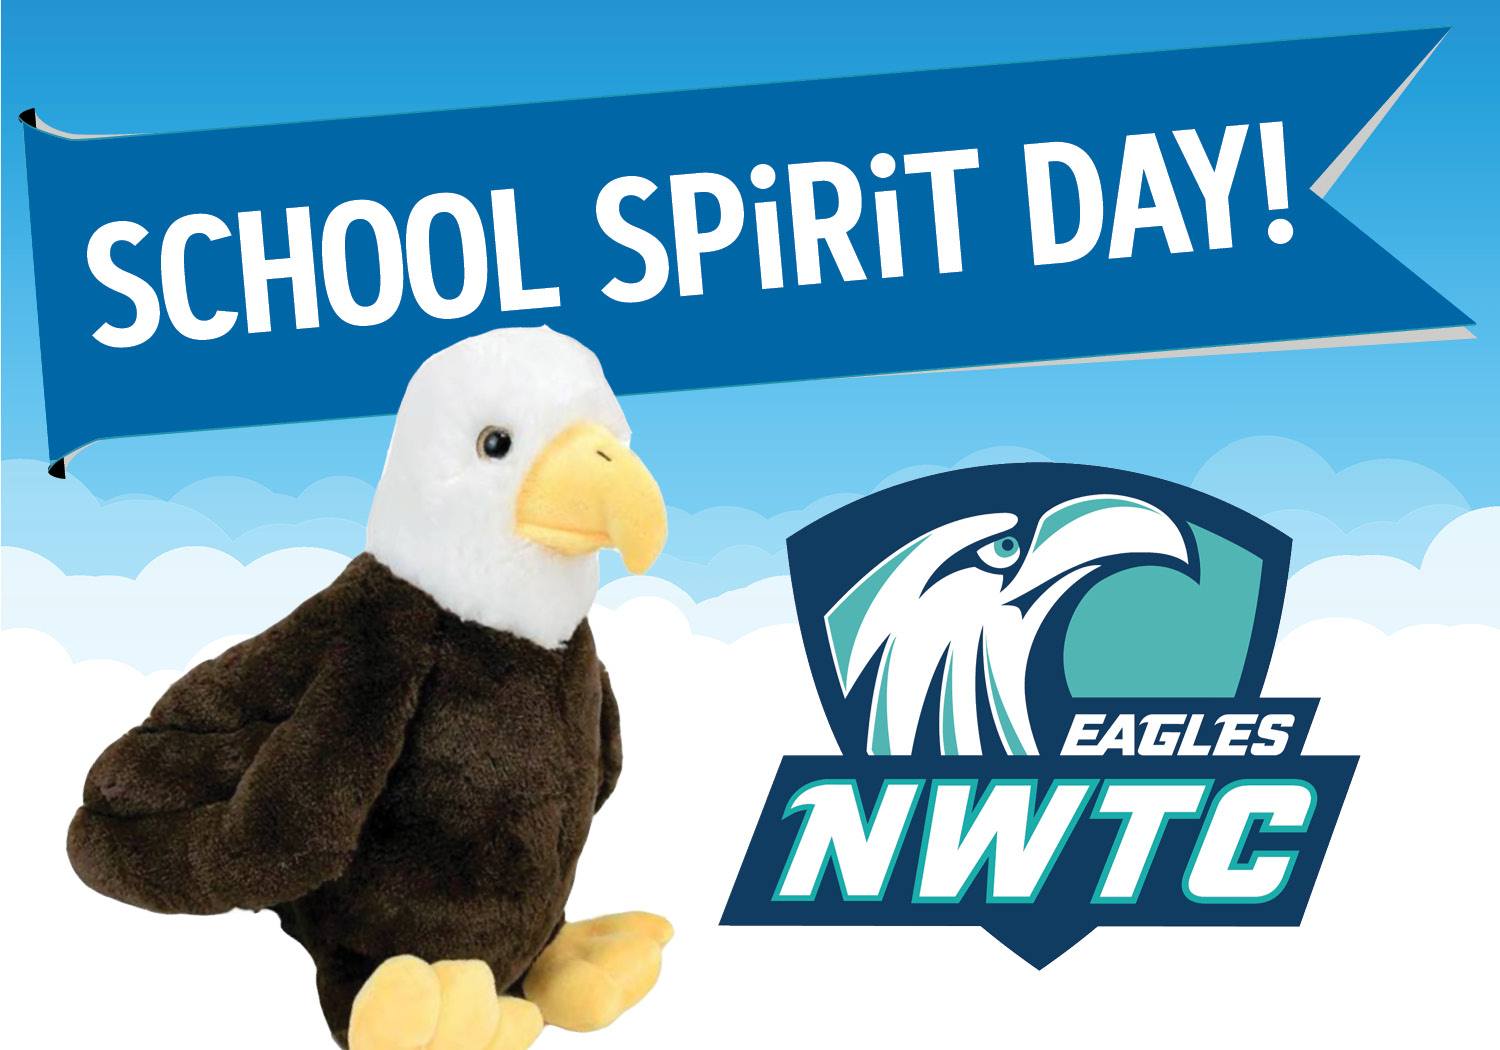 Join us in the Commons today and show your school spirit!